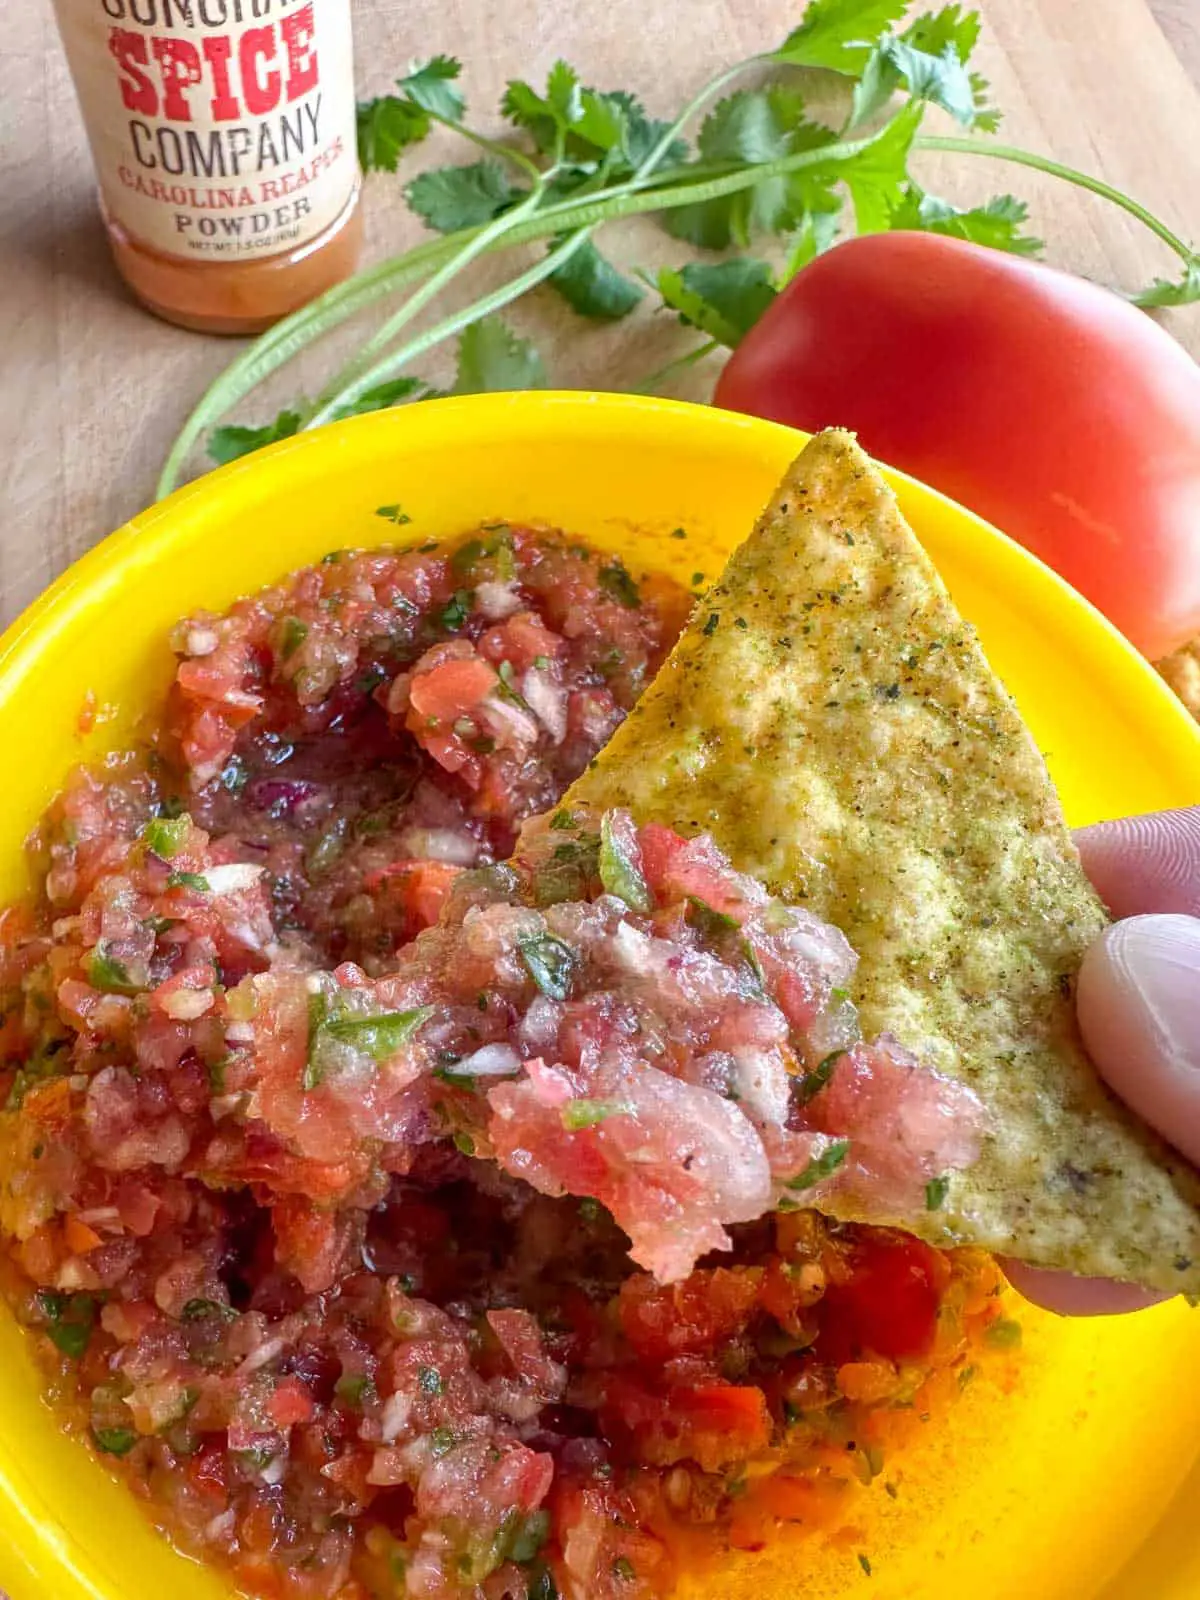 Carolina Reaper salsa in a yellow bowl with cilantro, and a tomato surrounding the bowl. There is a bottle of Carolina Reaper powder in the background and a person holding a tortilla chip which has been dipped into the salsa.